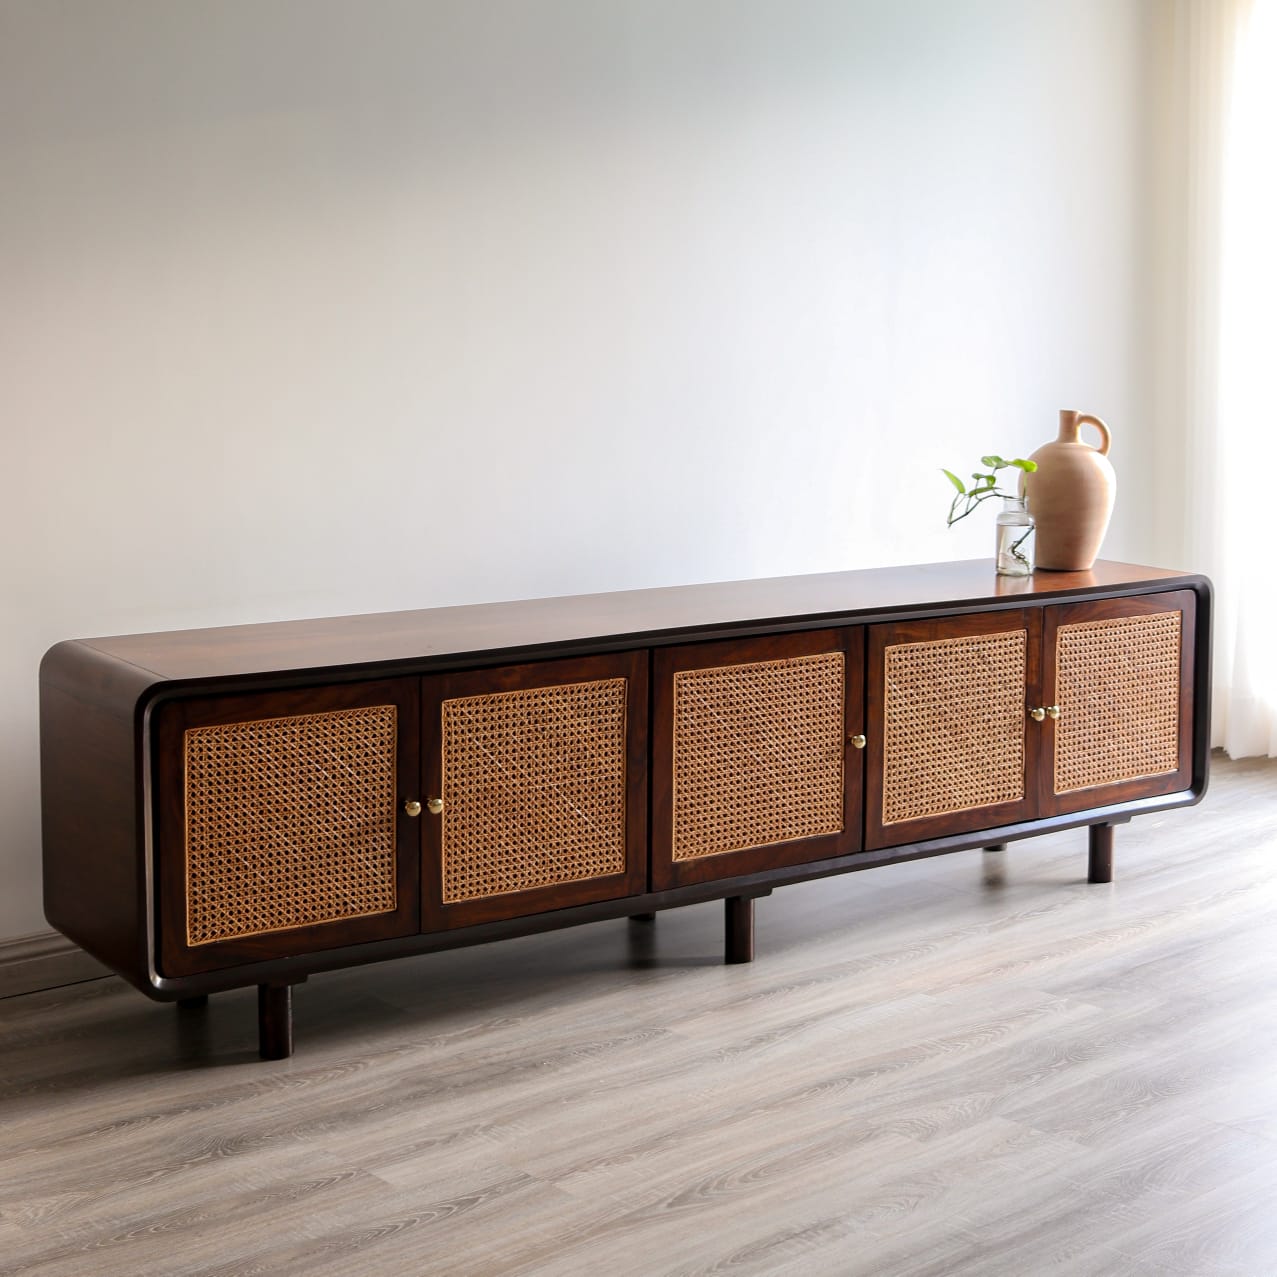 Casa sideboard and tv cabinet